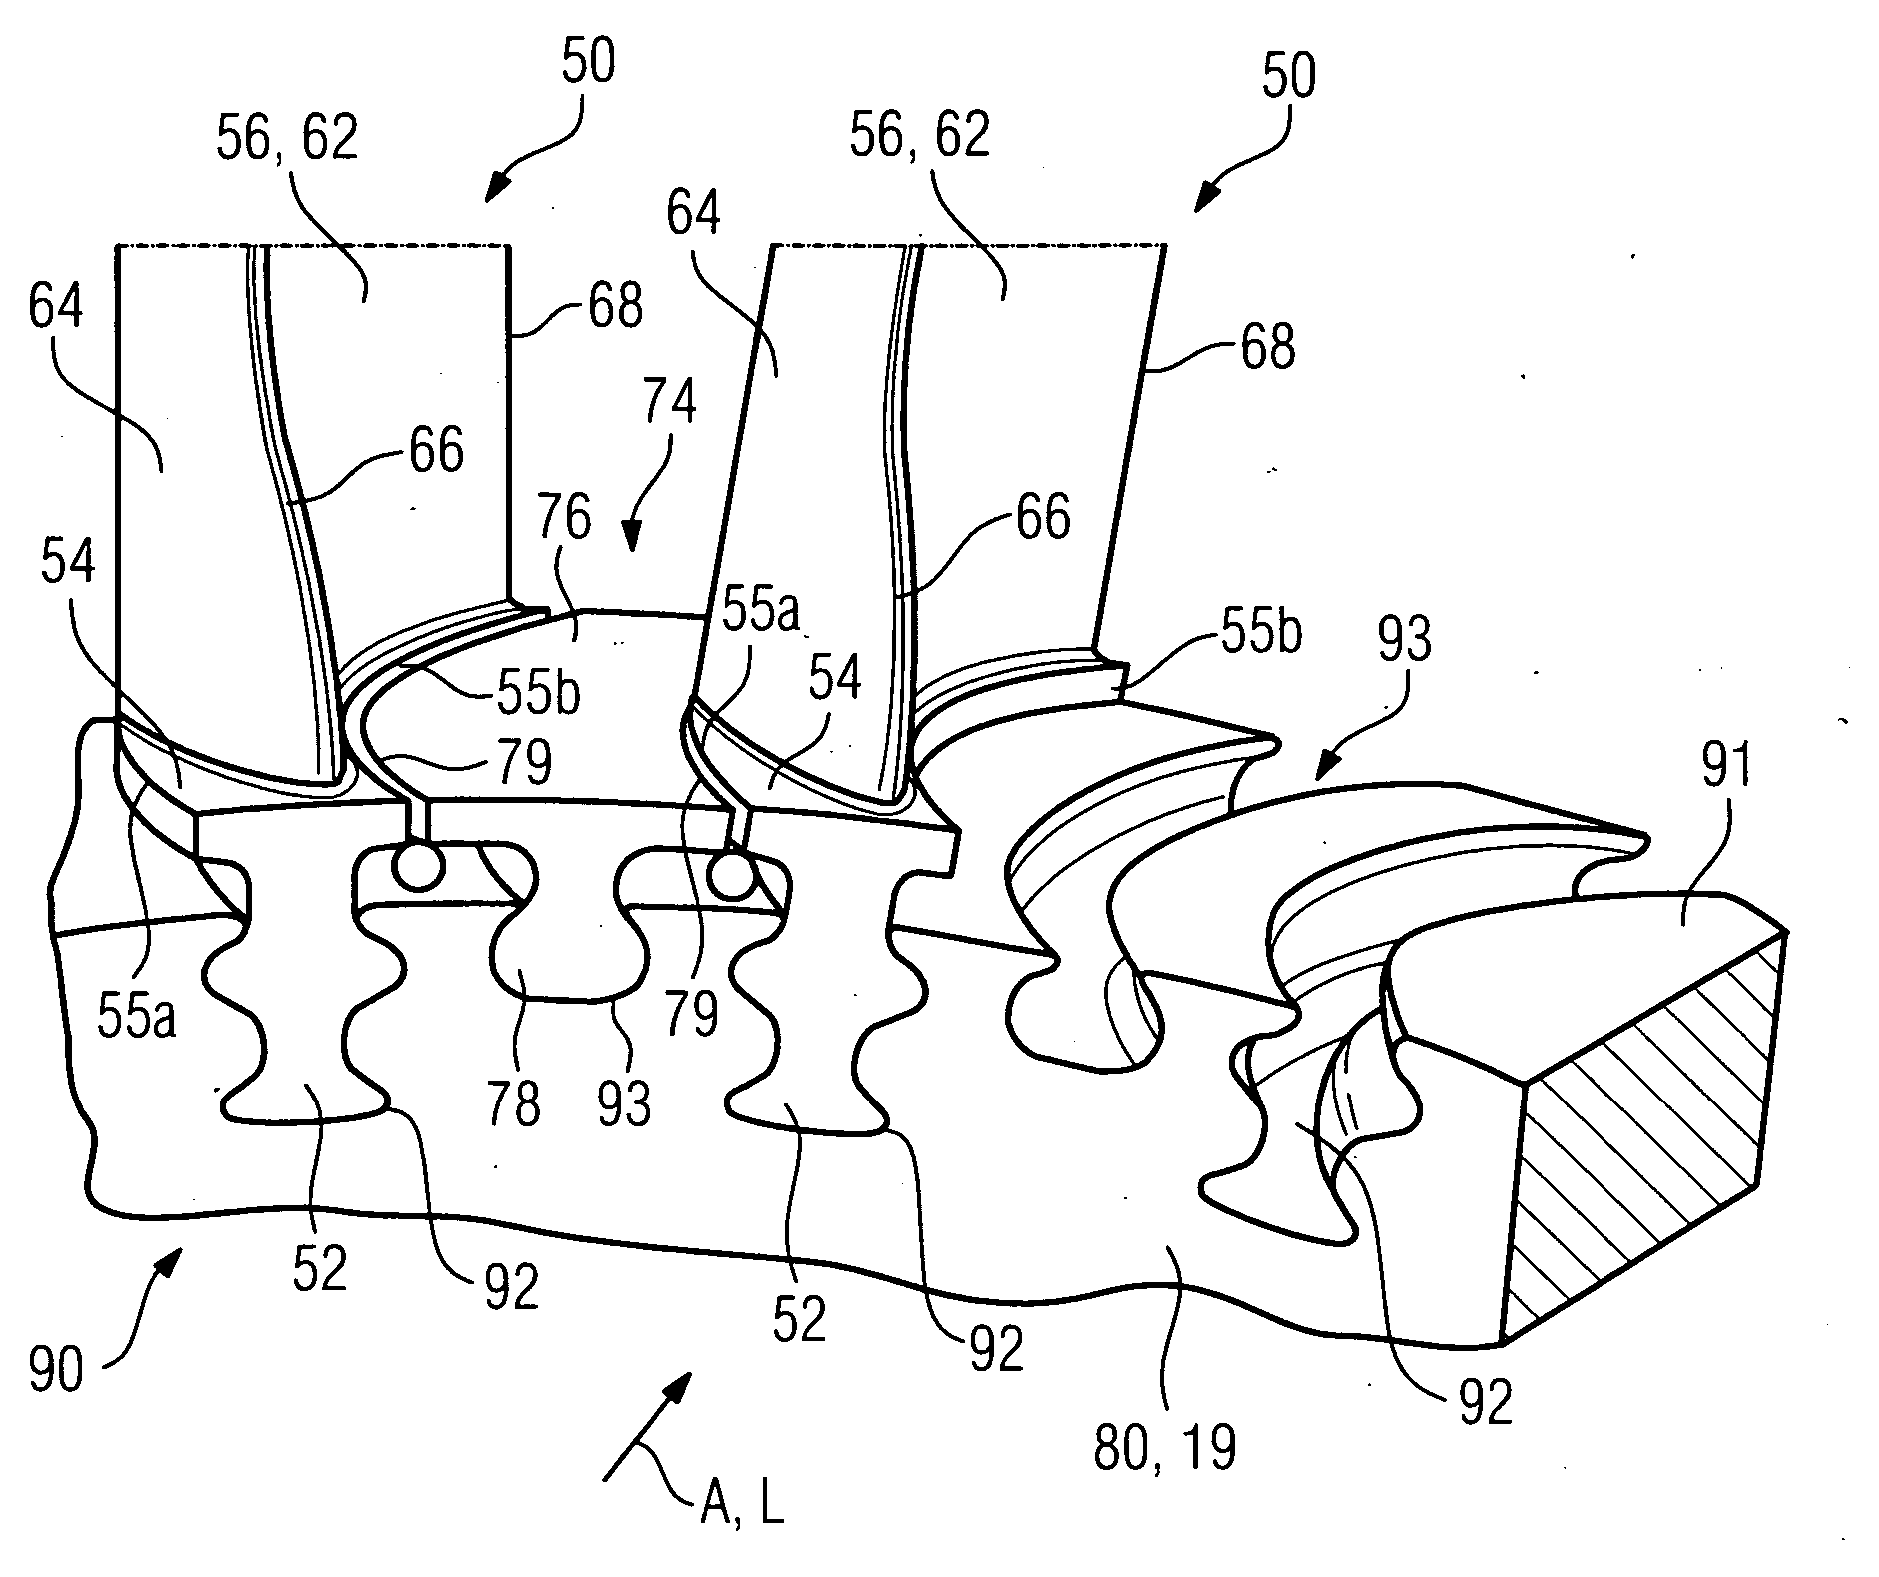 Gas turbine blade or vane and platform element for a gas turbine blade or vane ring of a gas turbine, supporting structure for securing gas turbine blades or vanes arranged in a ring, gas turbine blade or vane ring and the use of a gas turbine blade or vane ring